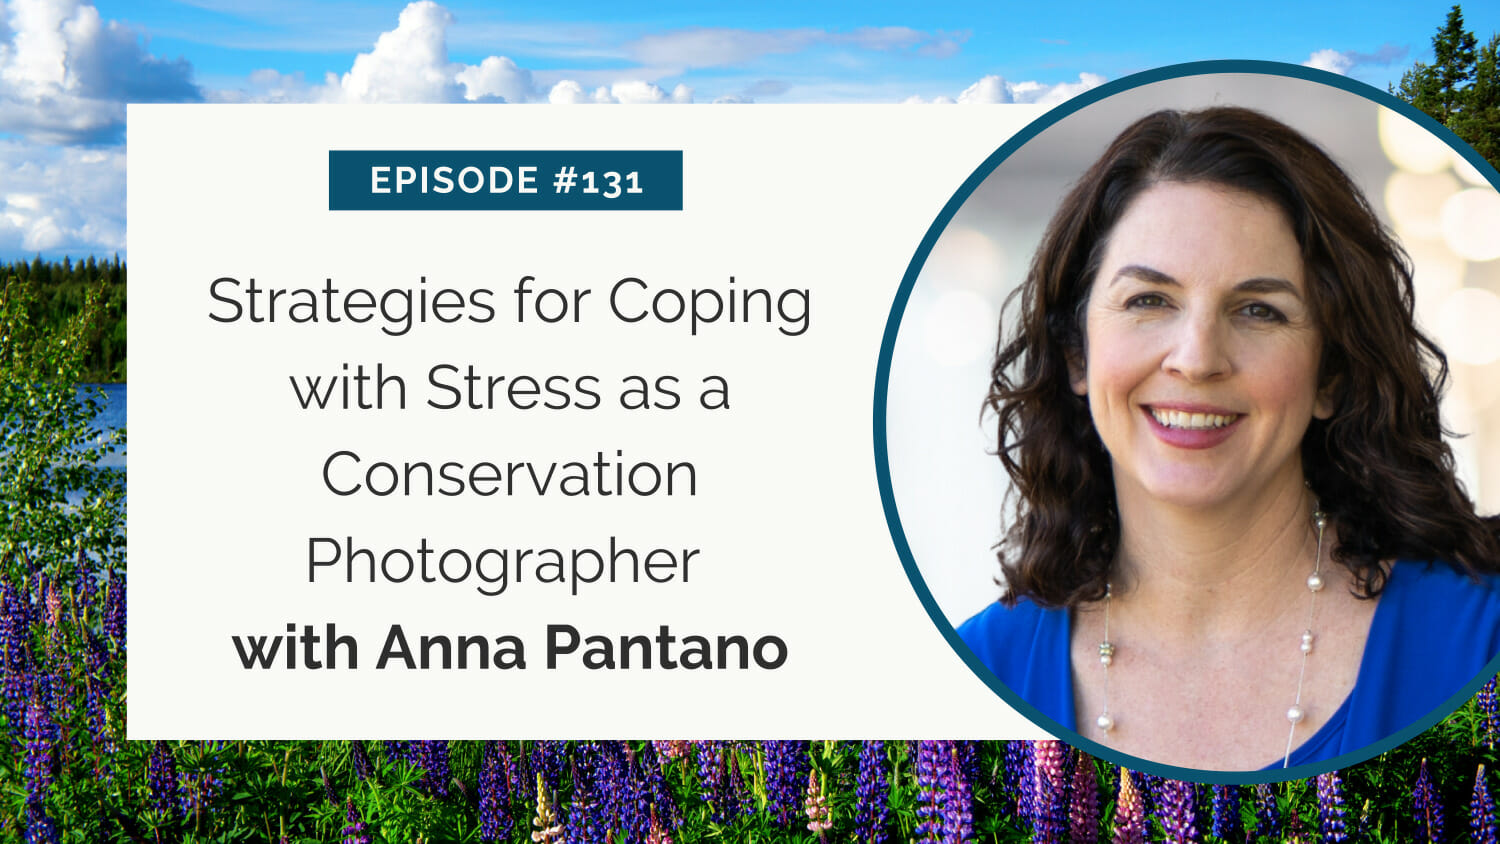 A promotional graphic for episode #131 featuring "strategies for coping with stress as a conservation photographer with anna pantano," against a backdrop of lush greenery and flowers.